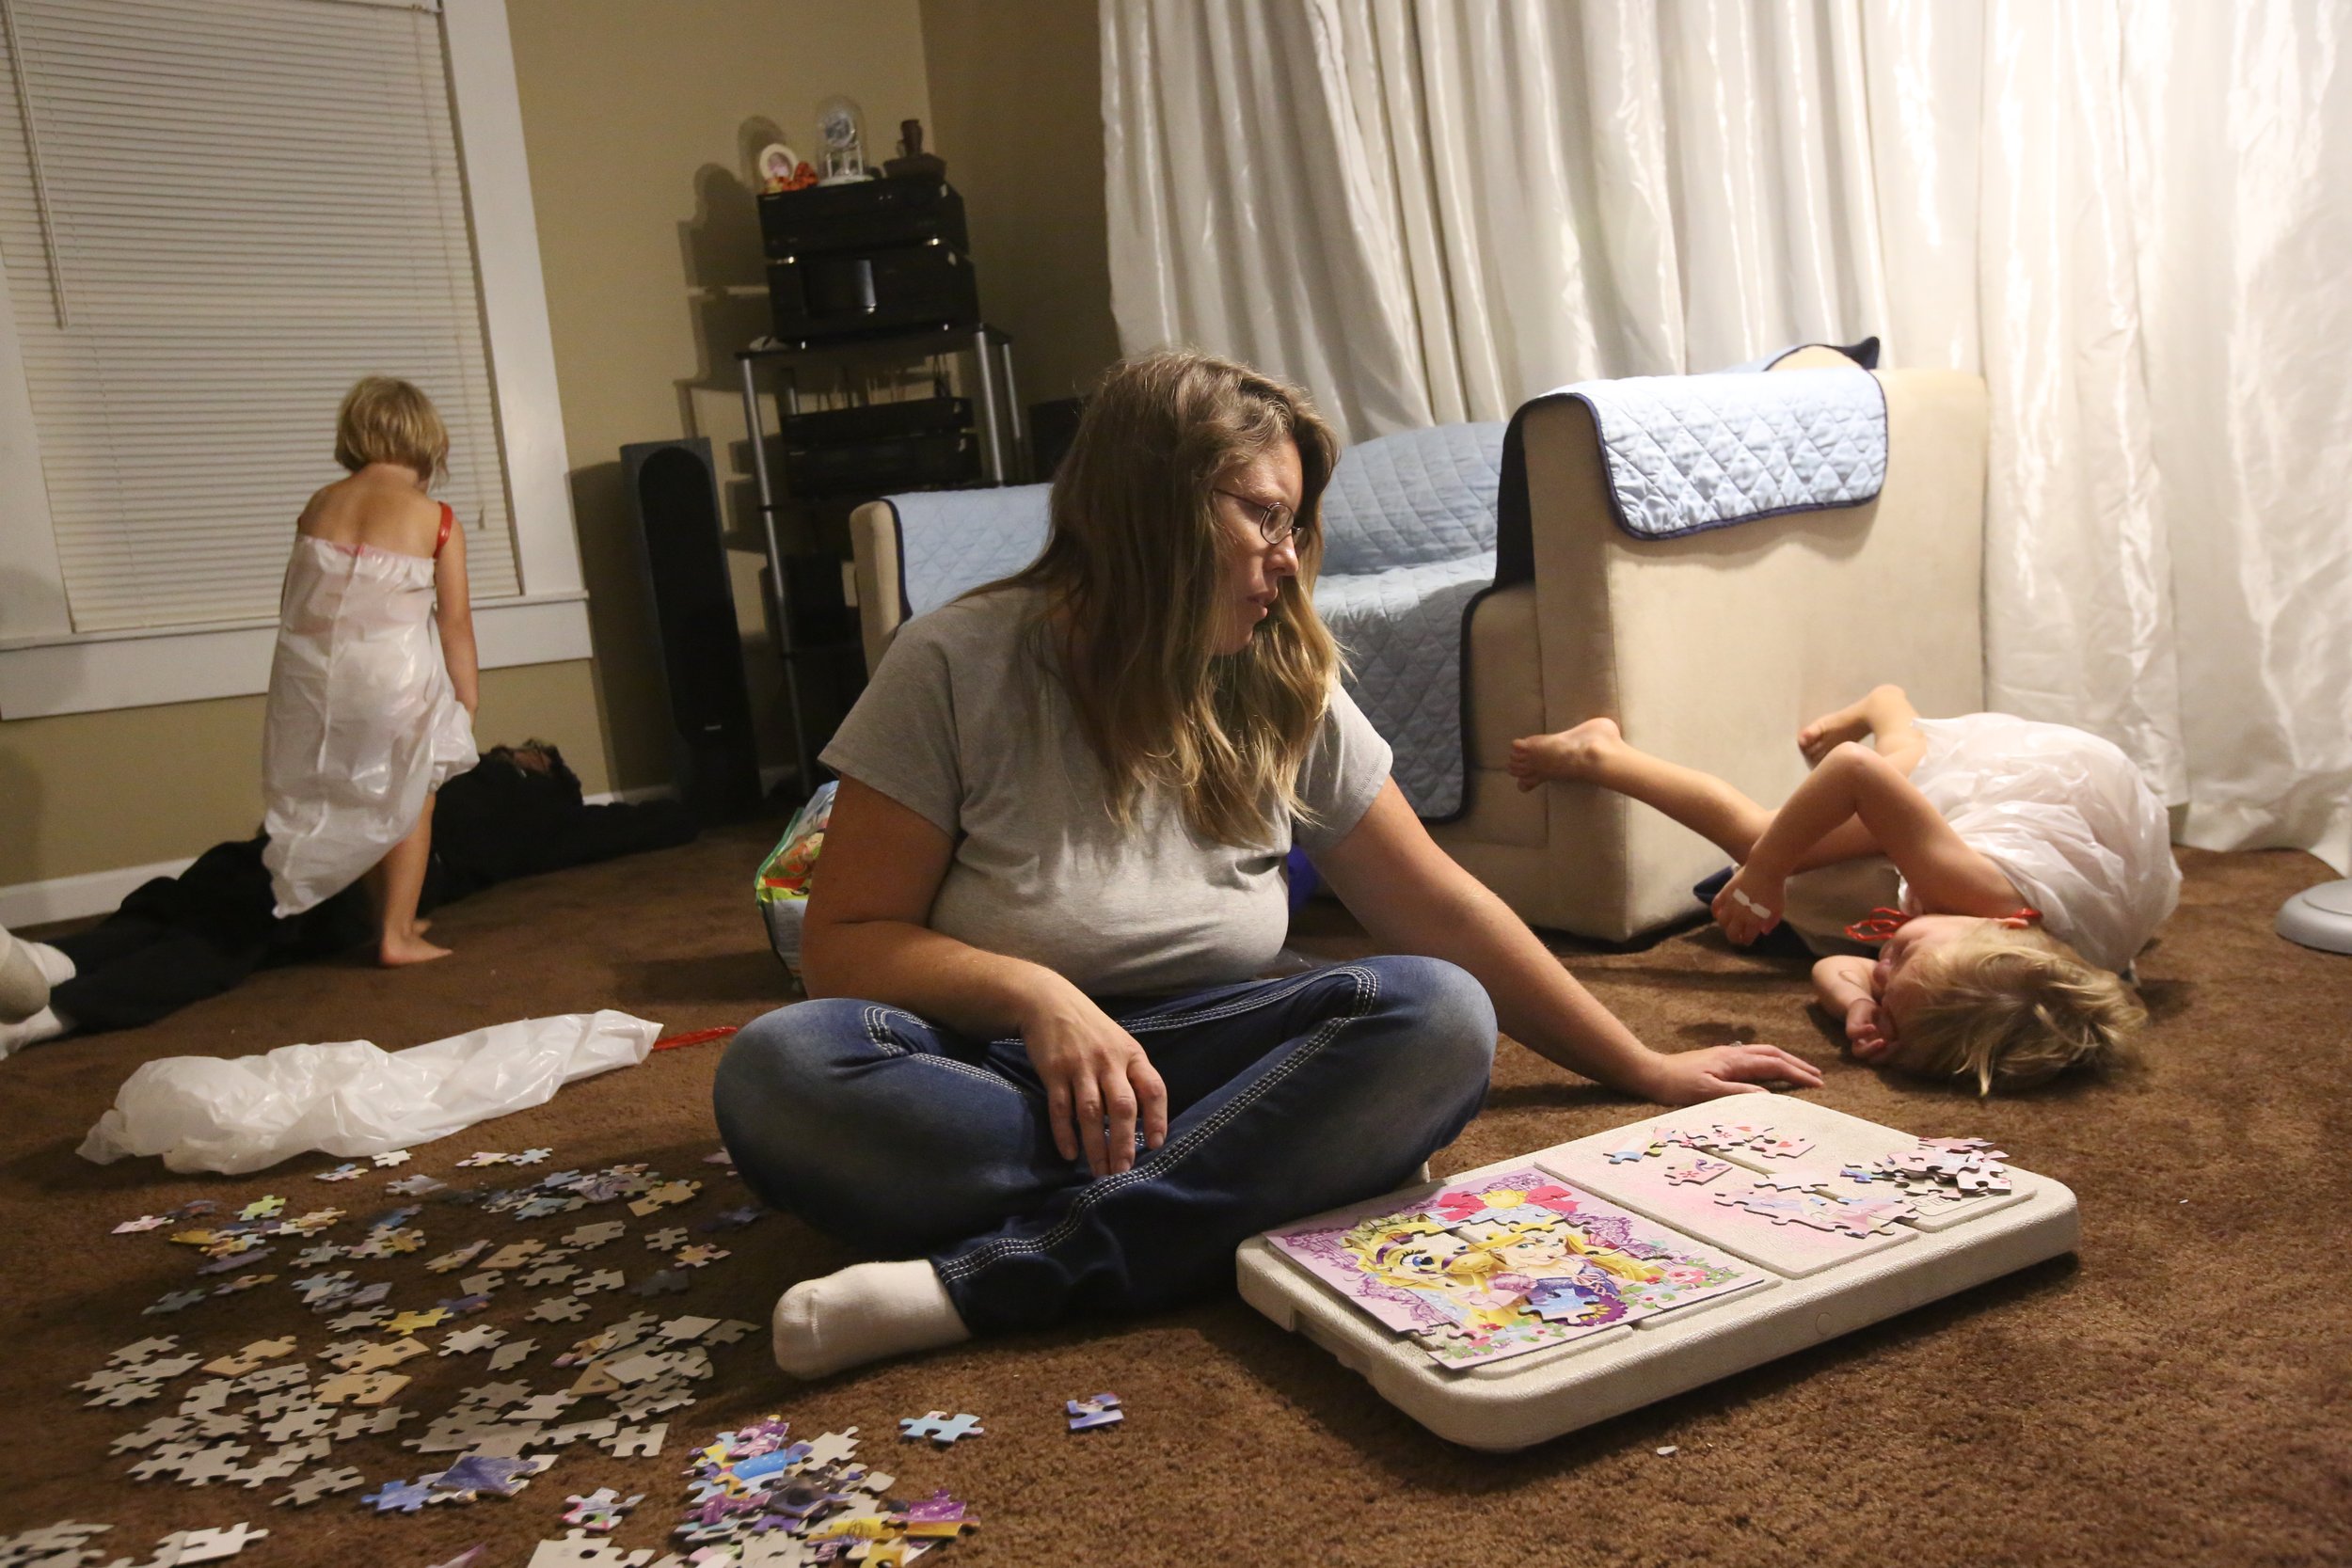  Josianne Thomas, center, tries to help her daughter Hailey, 4, wind down for the night as Hailey’s twin sister Tiffany wakes their father, Mike, up to ask him to head for bed at their home on Sept. 29, 2016. The attack on their family has made sleep